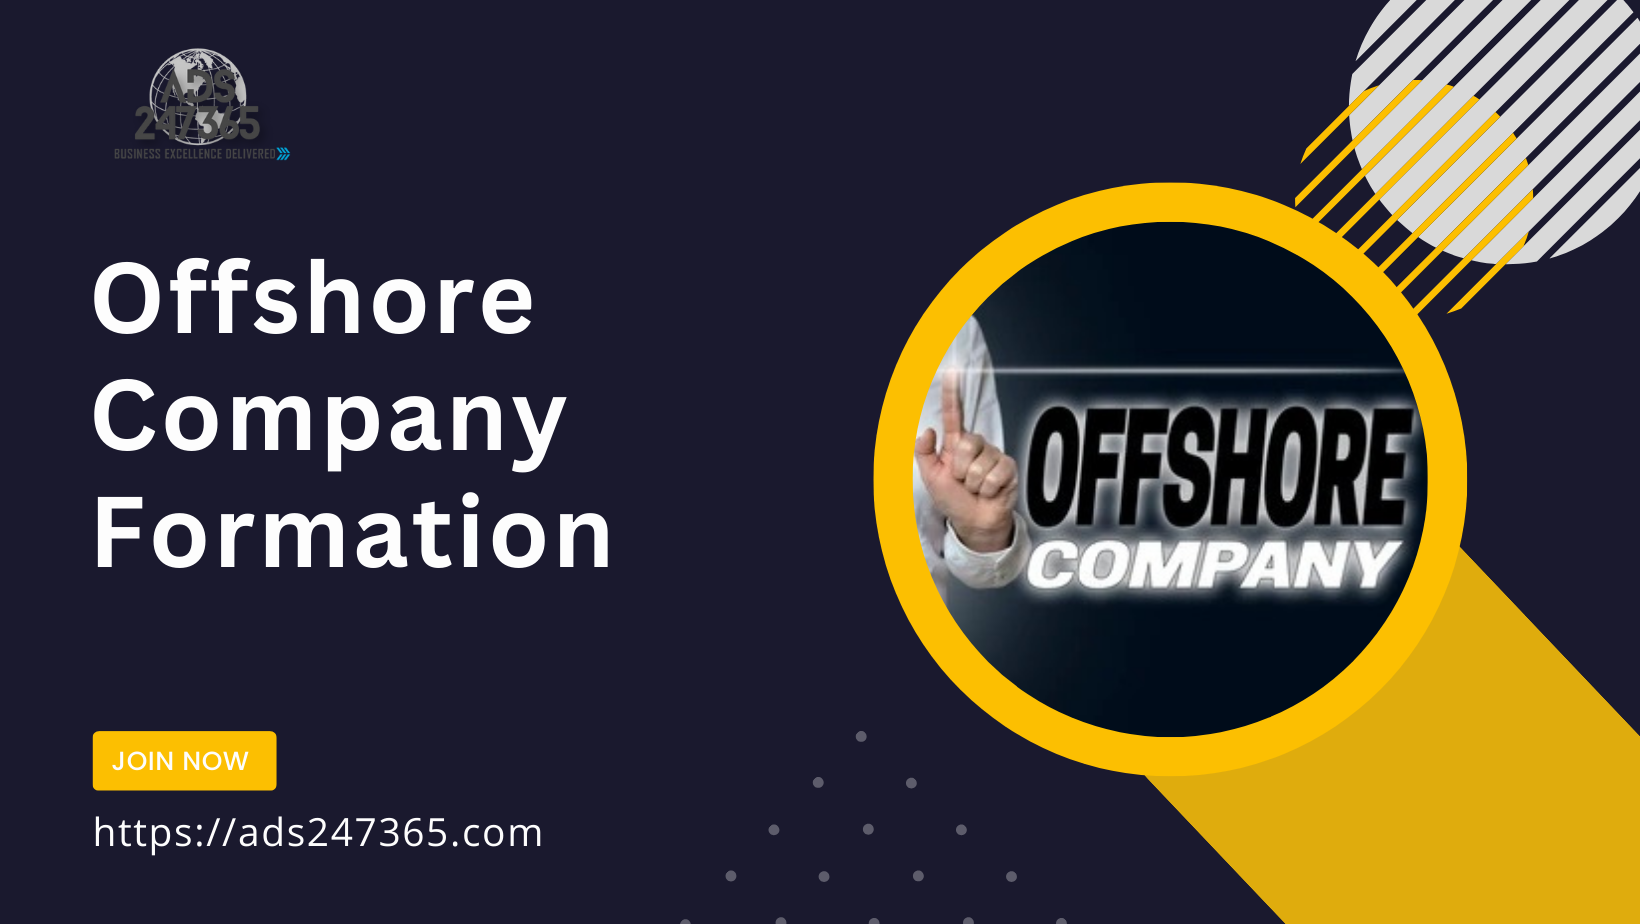 Maximizing Value: The Case for Cheapest Offshore Company Formation